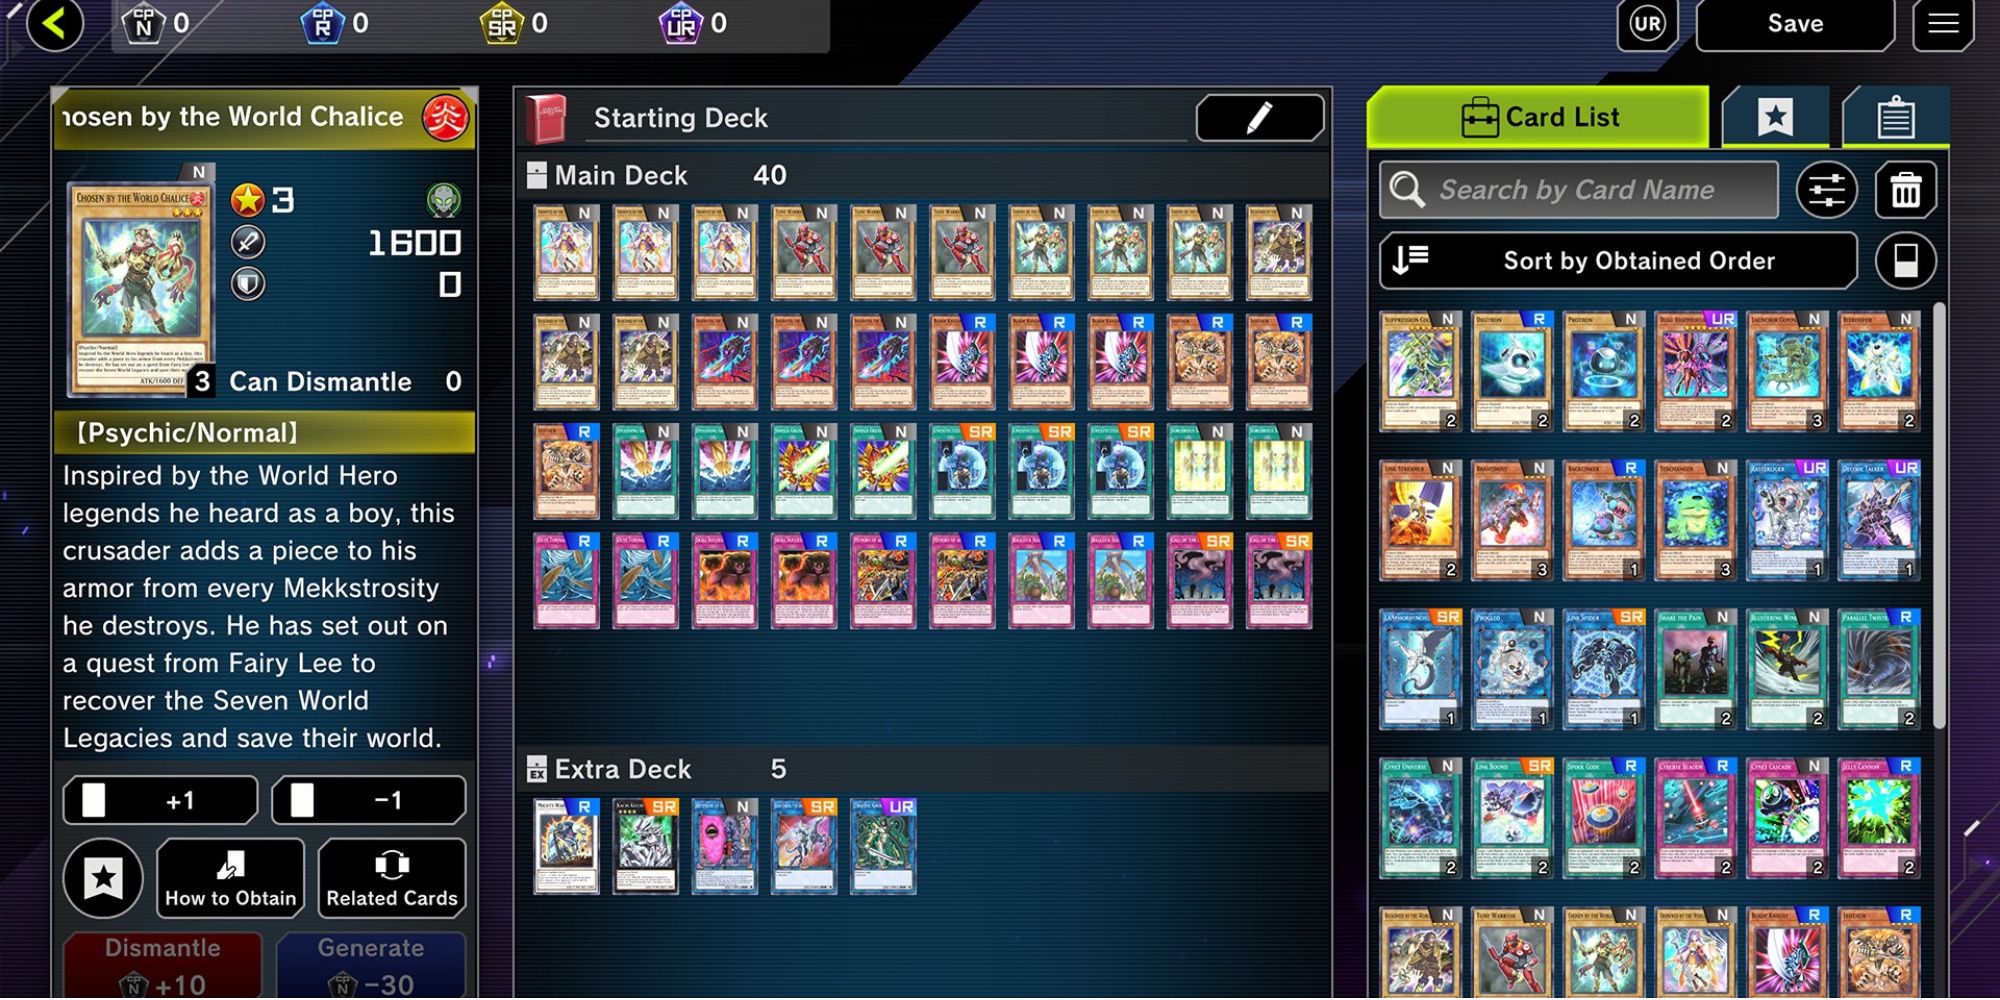 Great PvE Games - Yu-Gi-Oh! Master Duel - Player displays decks of digital cards